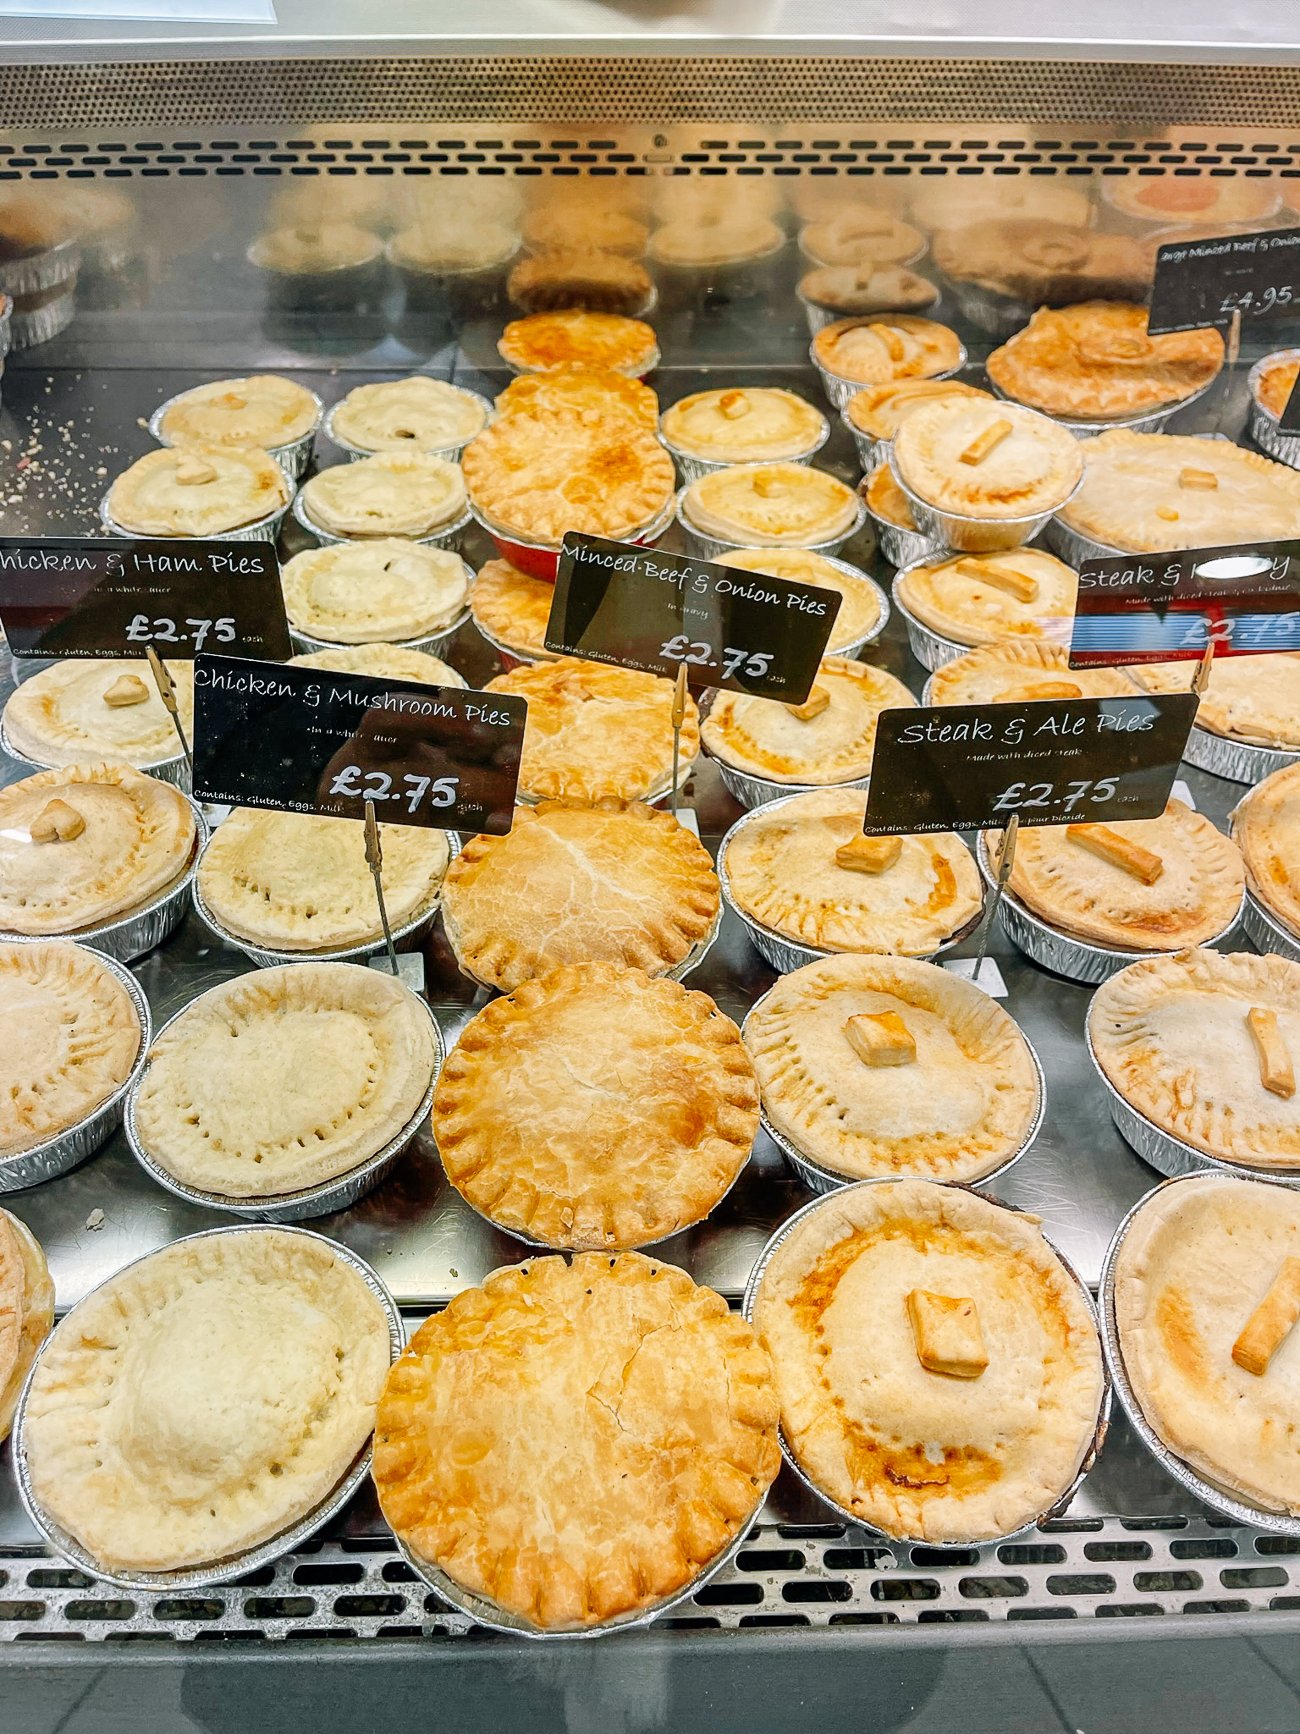 Meat pies under glass at Oxford Covered Market